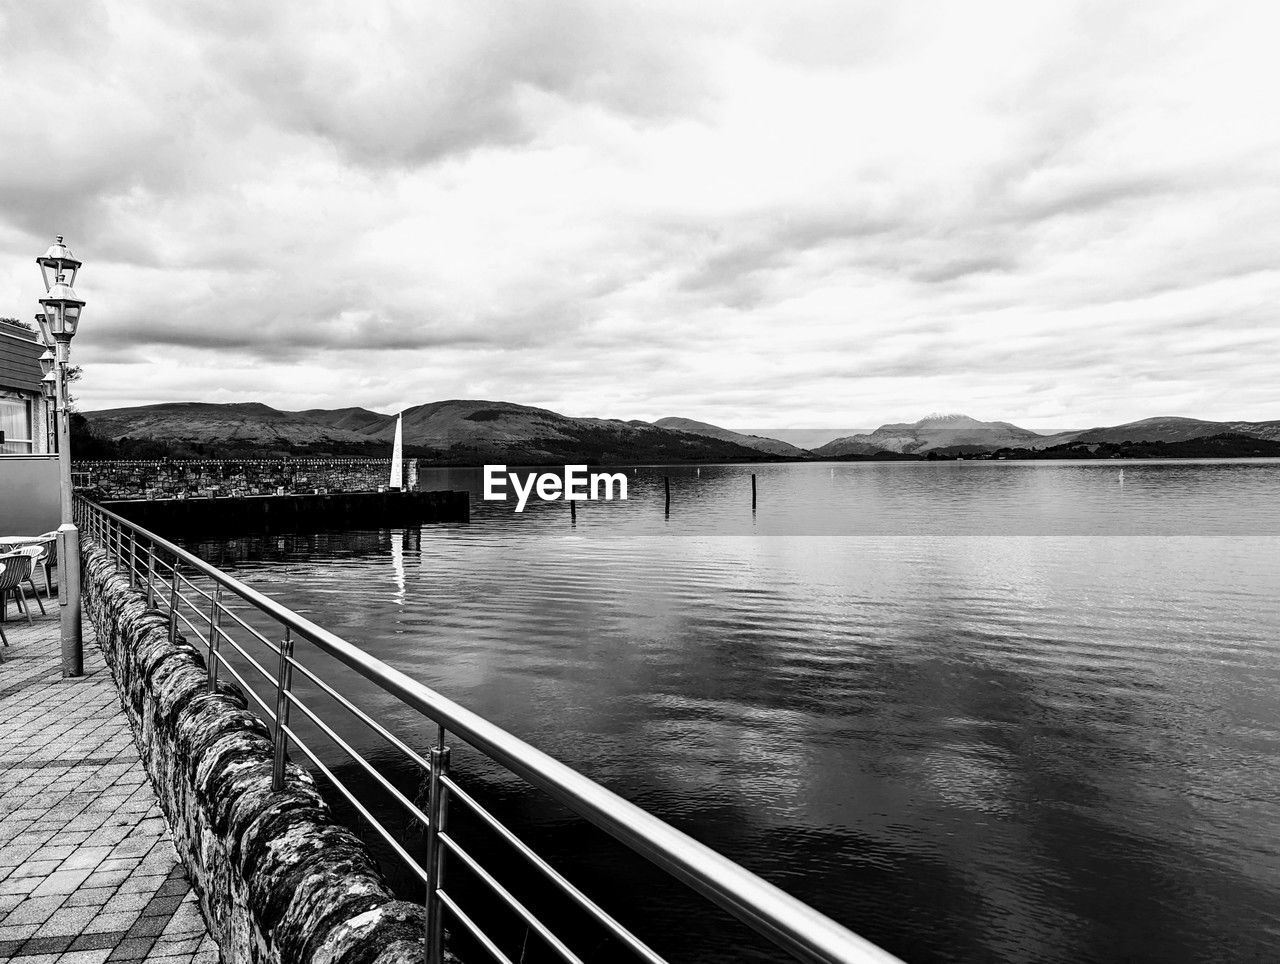 water, sky, black and white, cloud, monochrome, monochrome photography, nature, architecture, transportation, built structure, no people, day, scenics - nature, outdoors, mountain, sea, travel, tranquility, travel destinations, beauty in nature, railing, tranquil scene, building exterior, bridge, black, reflection